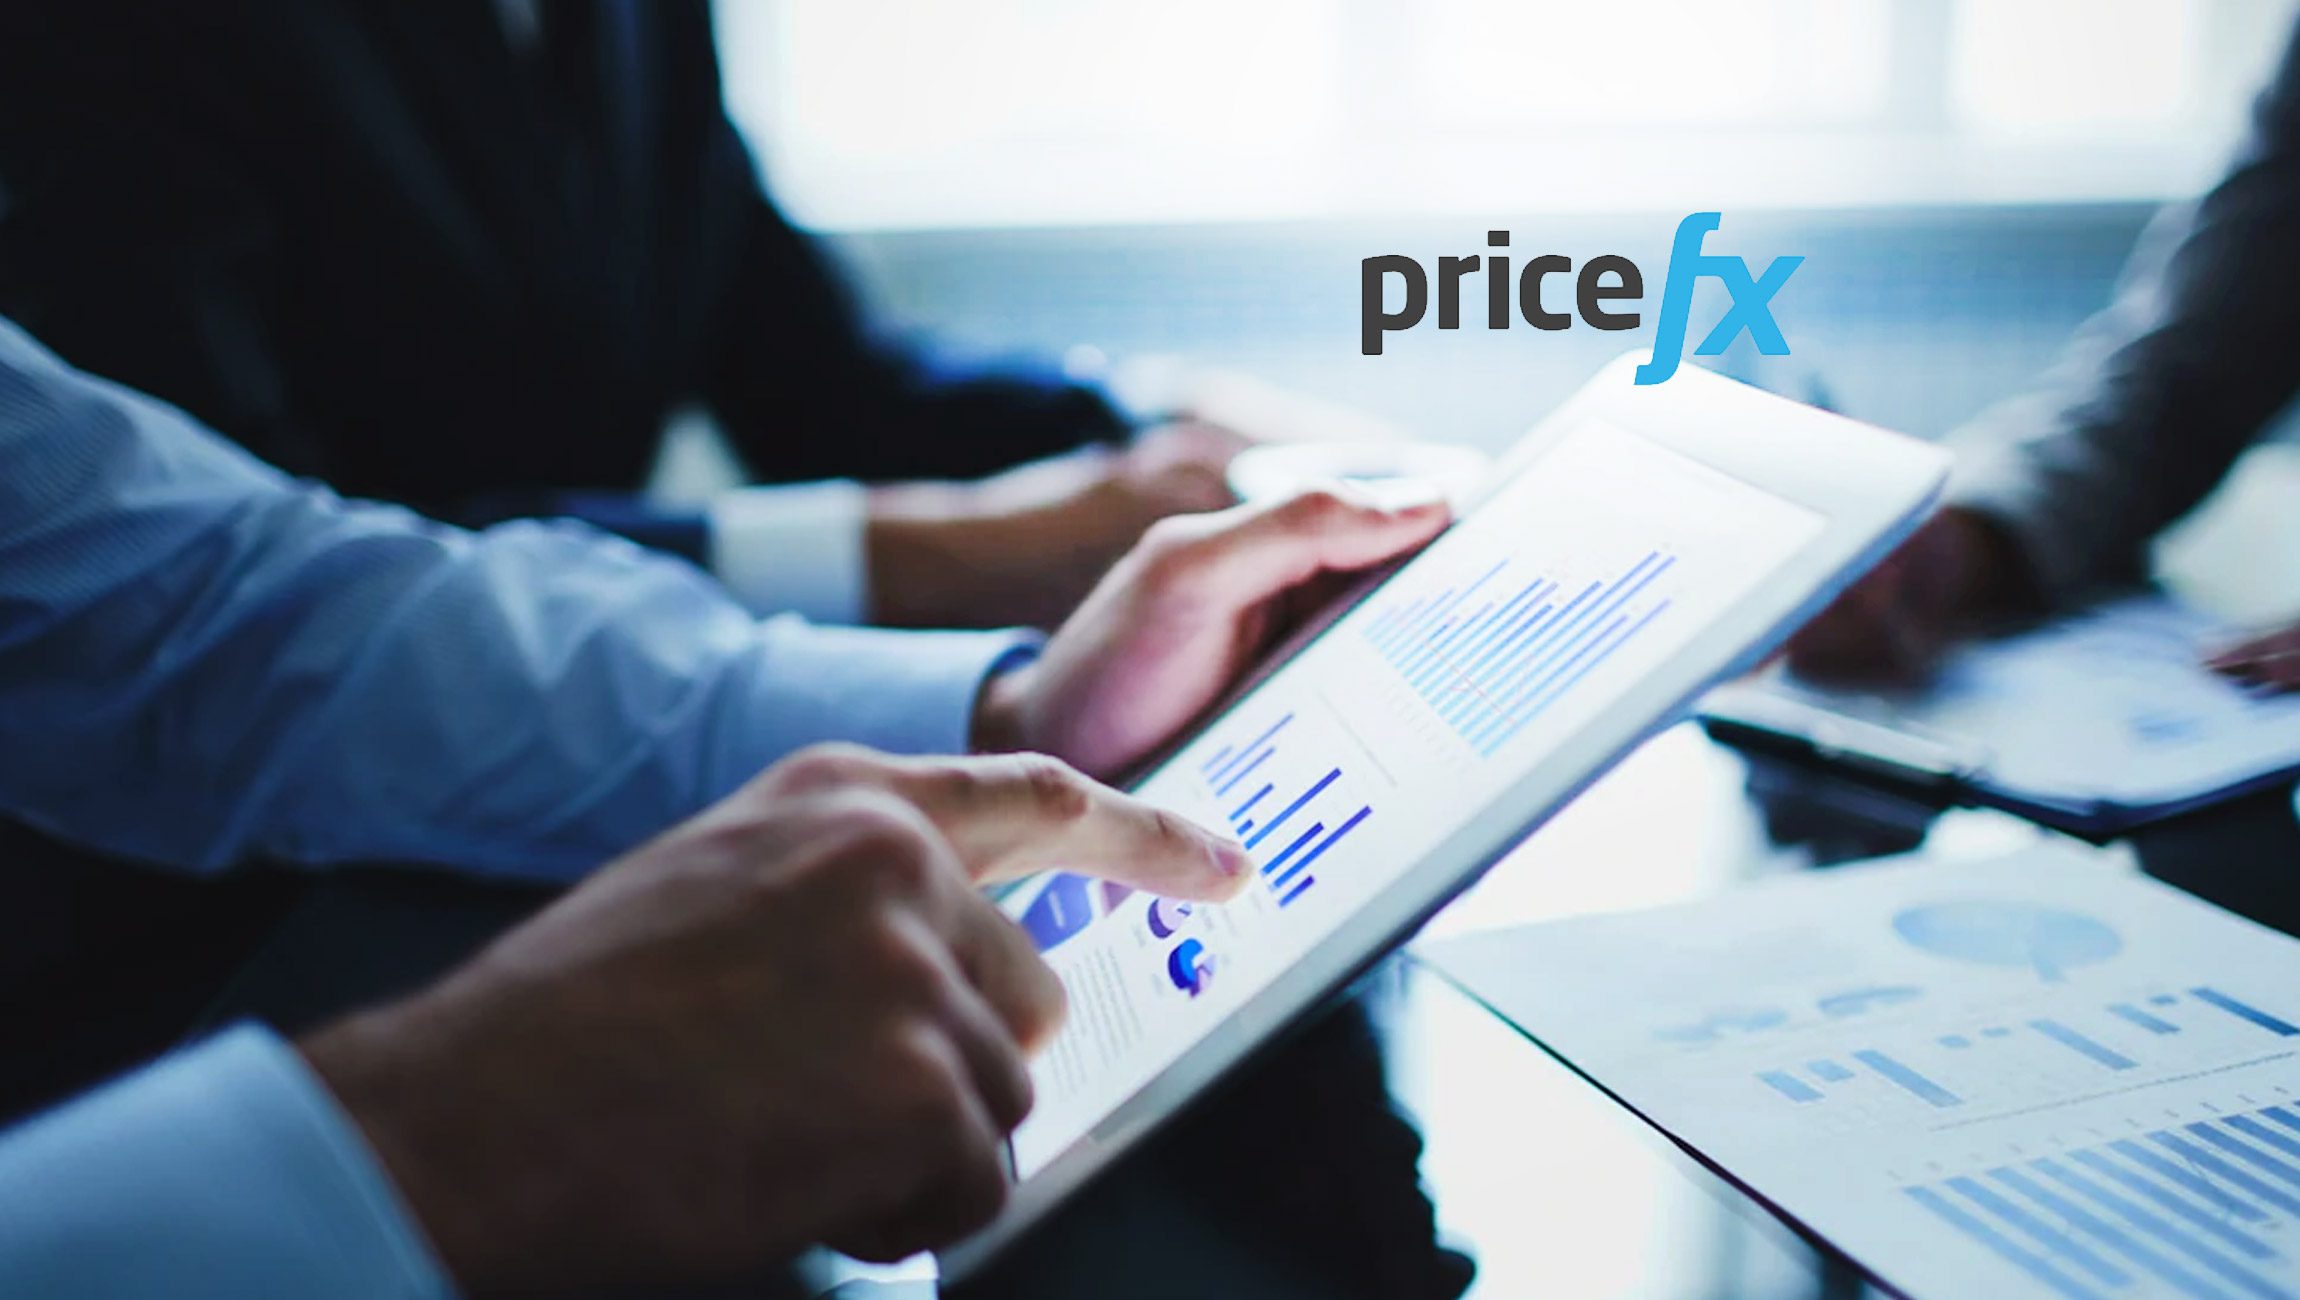 Pricefx Experts Predict Market Volatility, Direct-to-Consumer Growth and M&A Activity for 2023